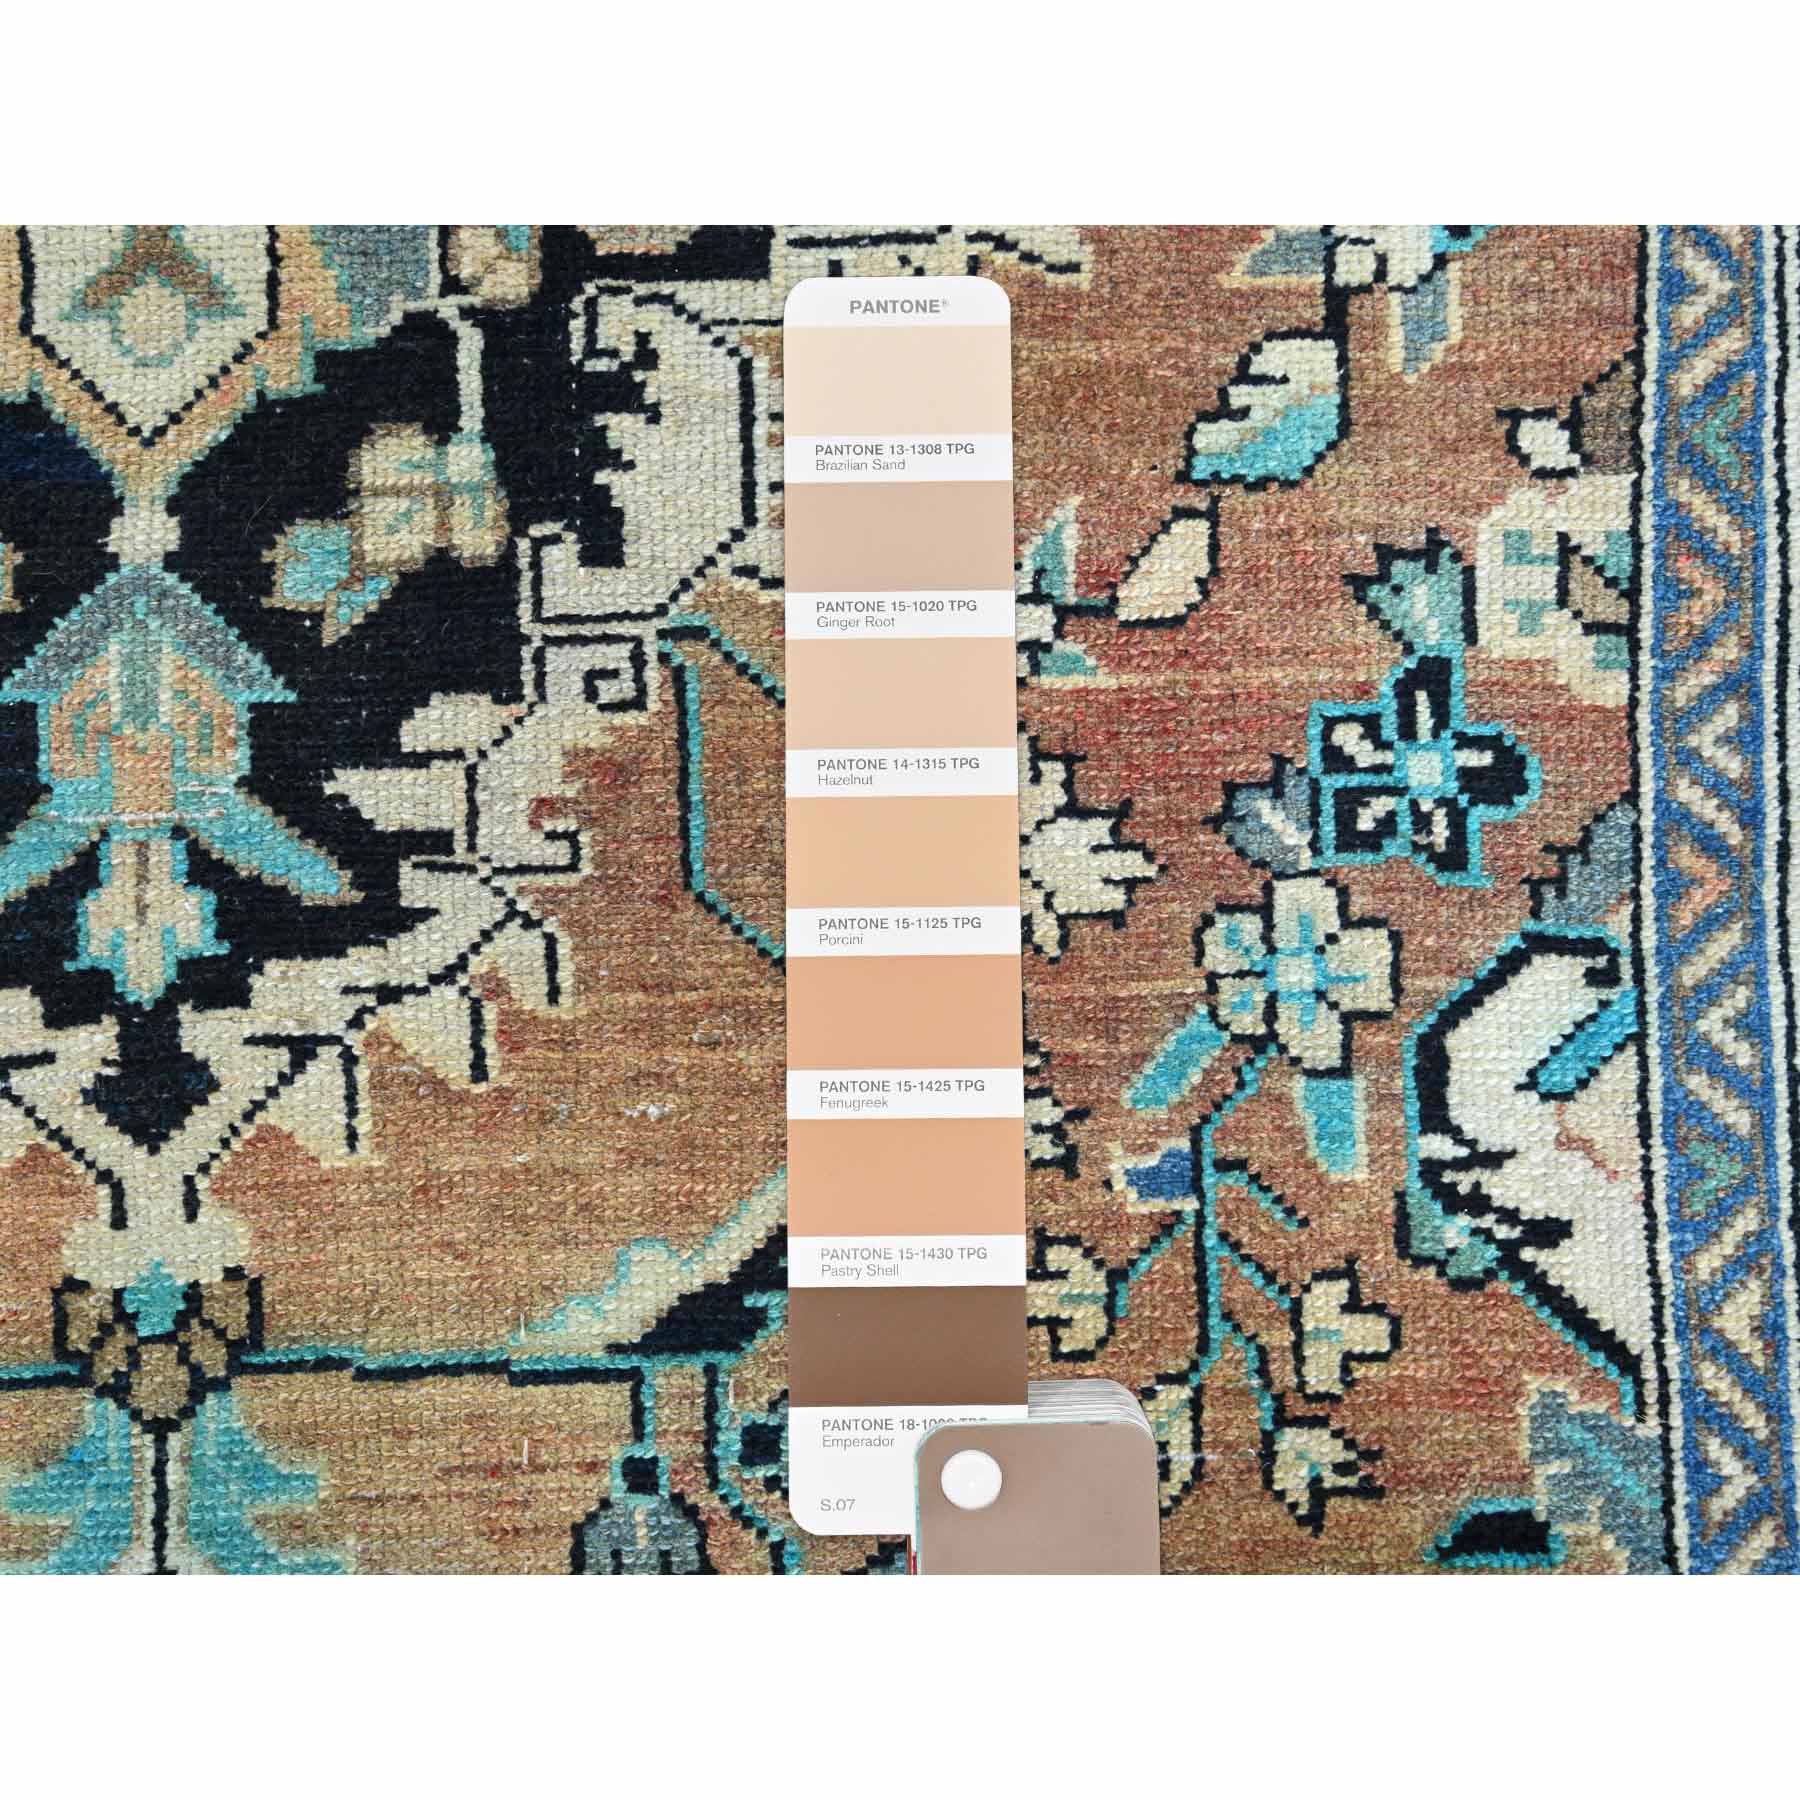 Overdyed-Vintage-Hand-Knotted-Rug-305015